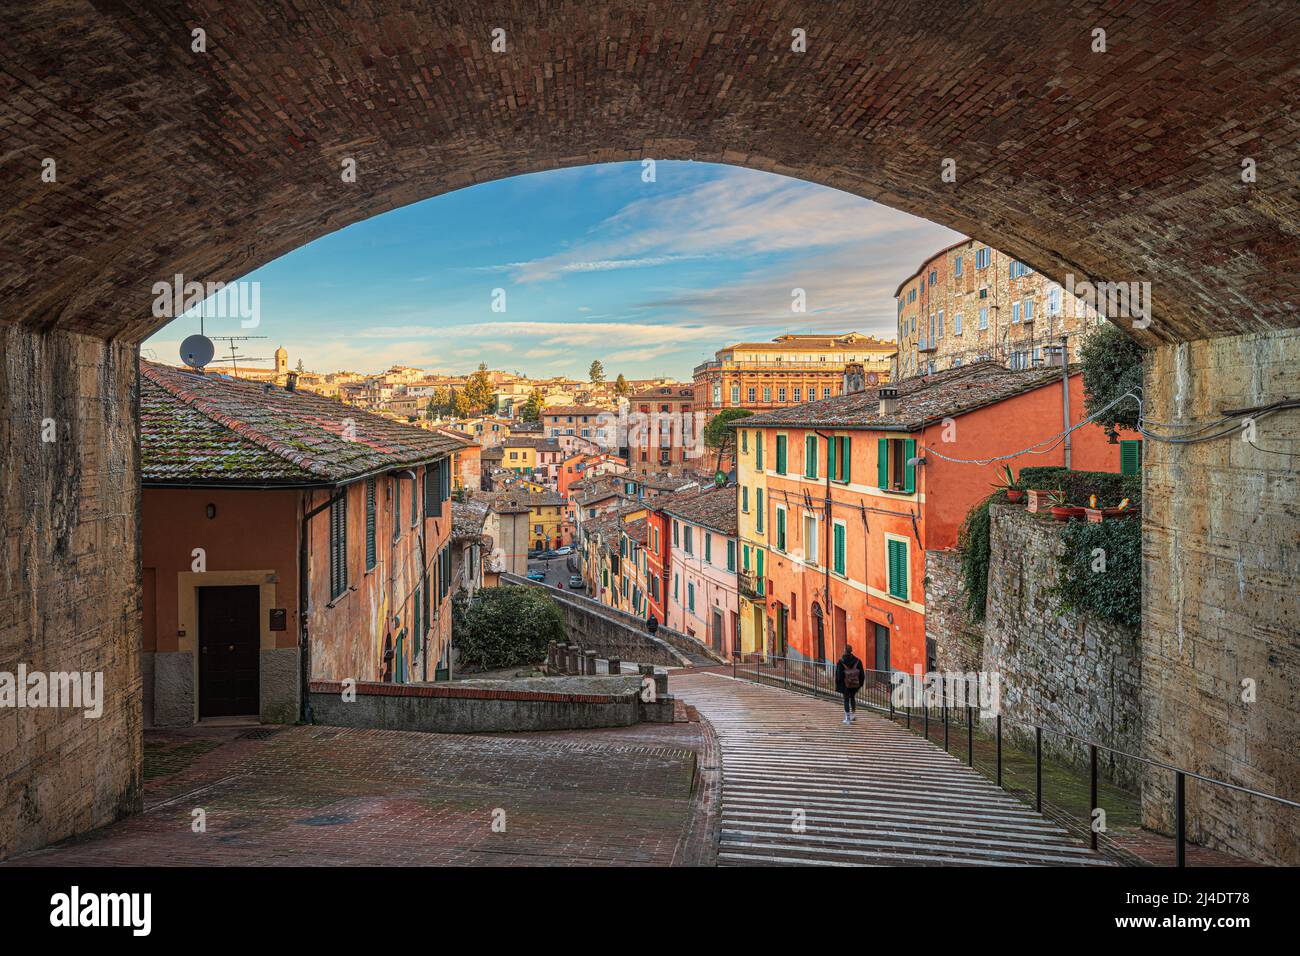 Perugia, Italy on the medieval Aqueduct Street in the morning. Stock Photo